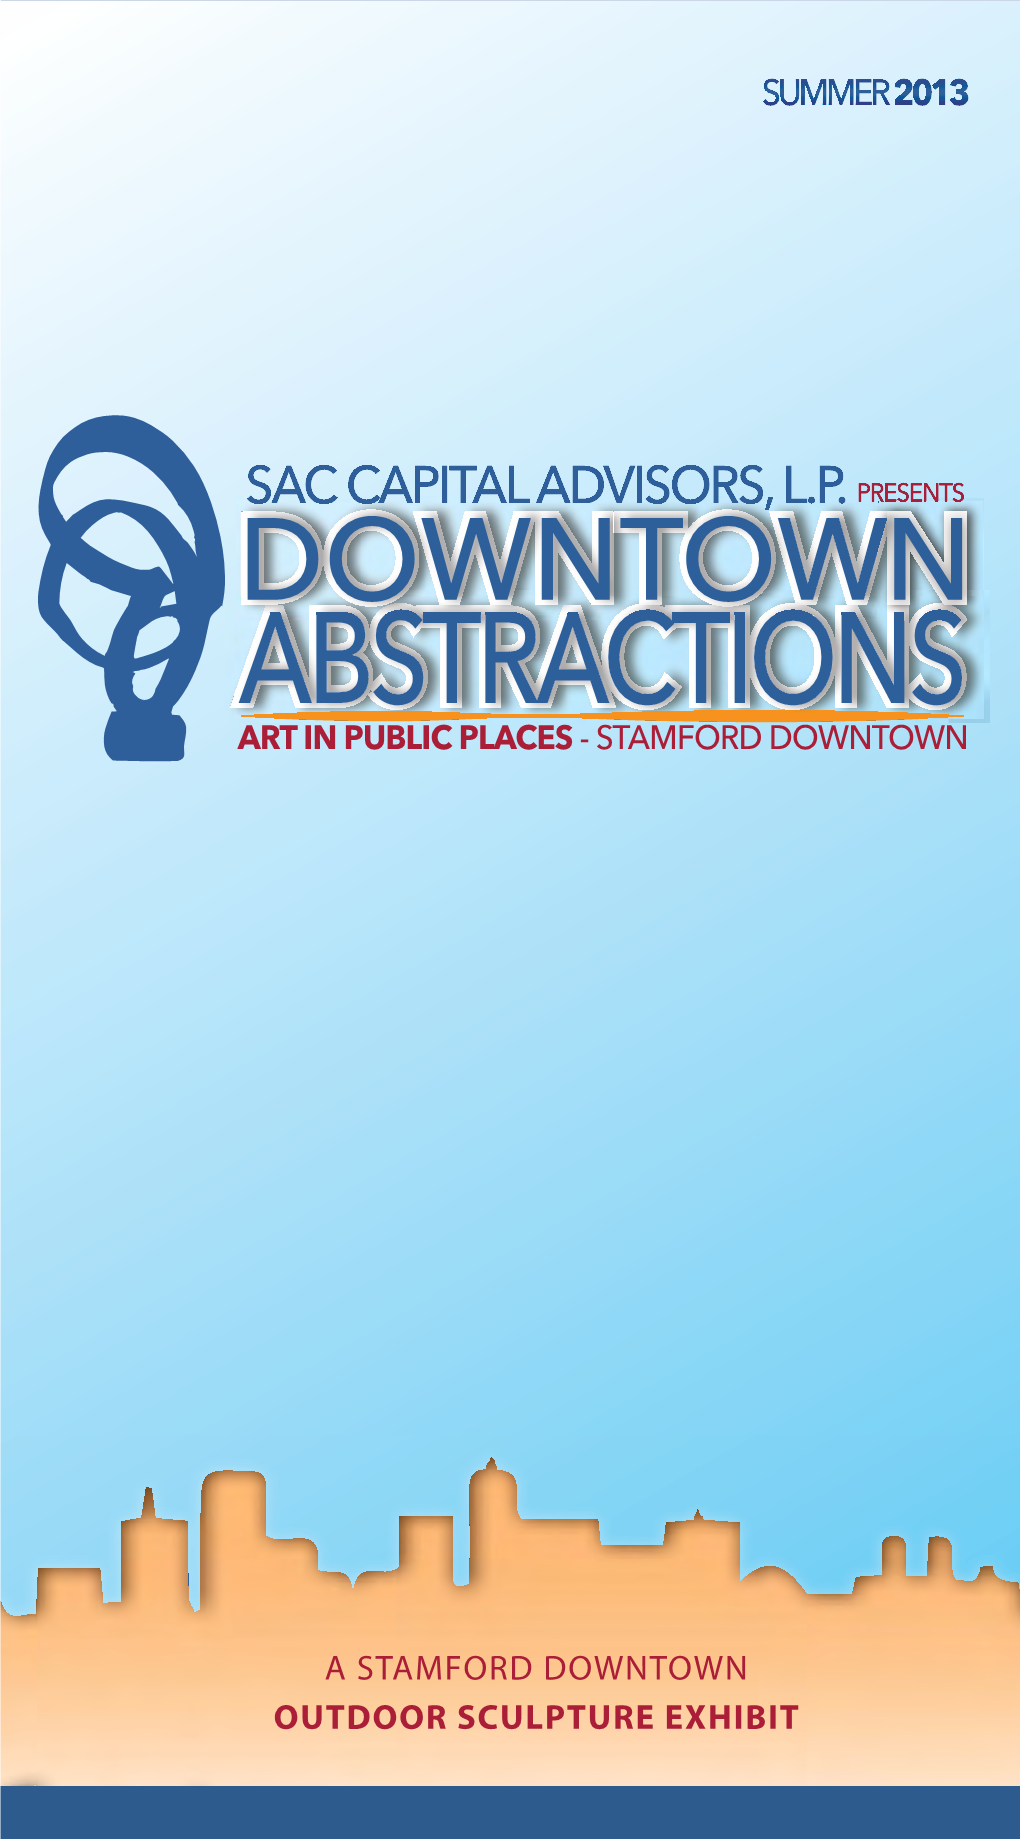 A STAMFORD DOWNTOWN OUTDOOR SCULPTURE EXHIBIT ART in PUBLIC PLACES | Summer 2013 SAC CAPITAL ADVISORS, L.P